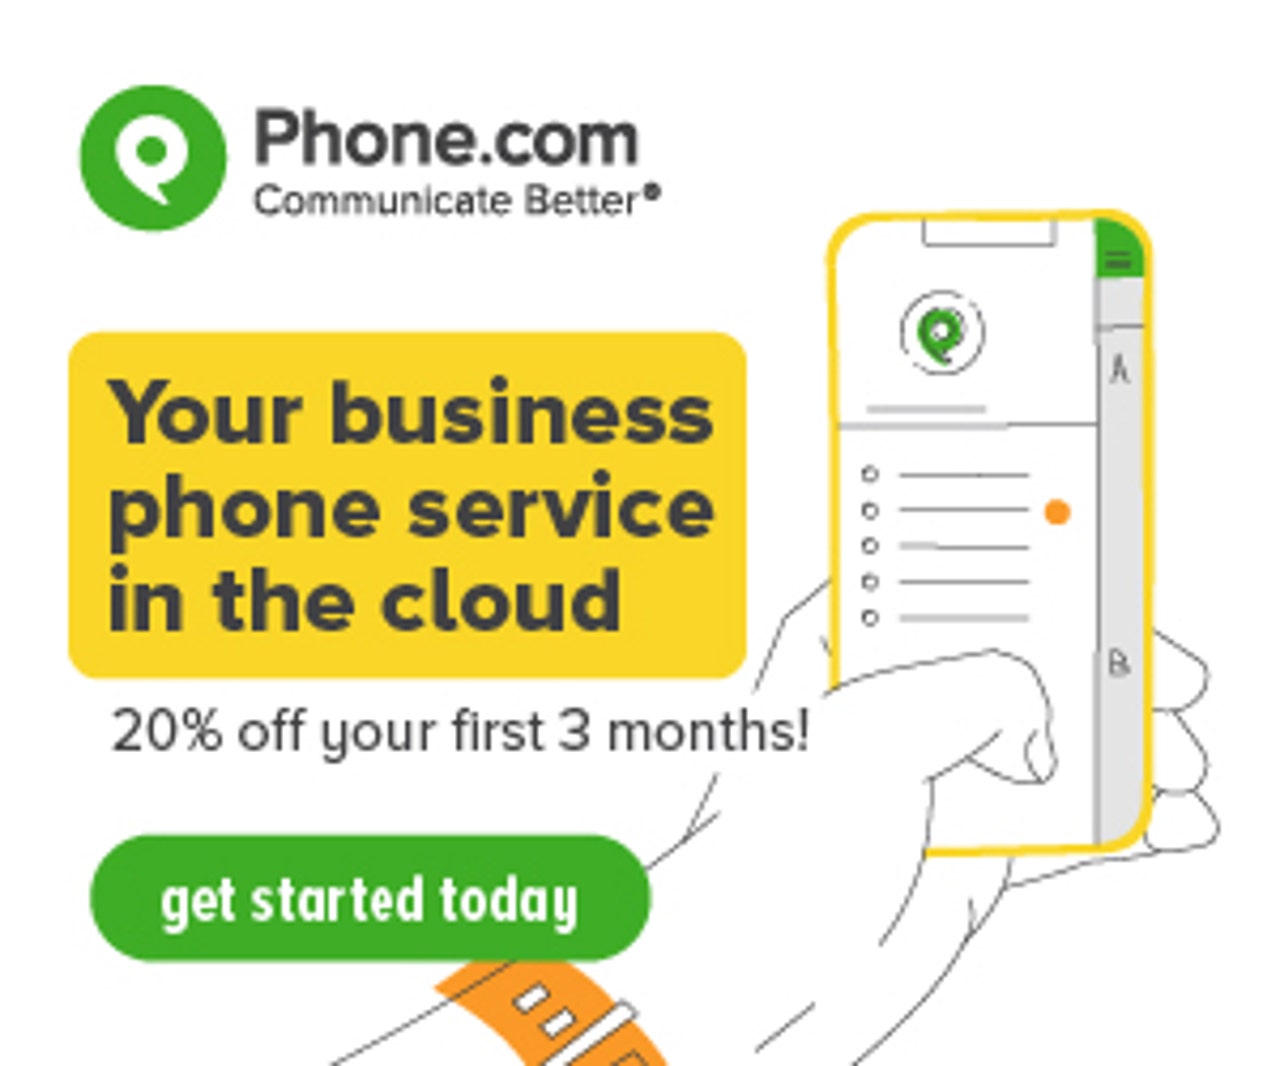 300x250 Your Business Phone Service in the Cloud